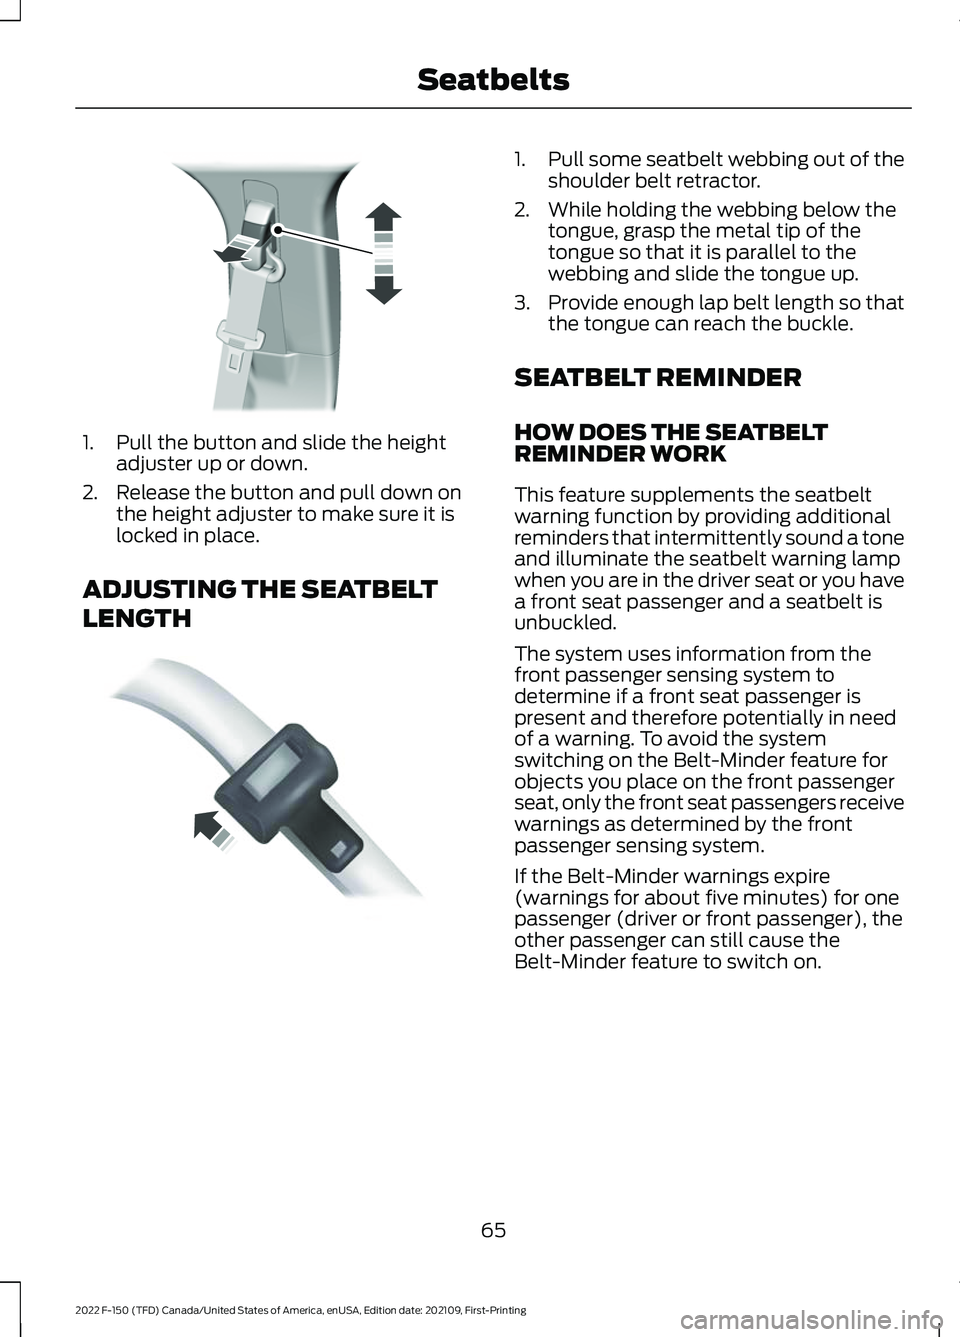 FORD F-150 2022  Owners Manual 1. Pull the button and slide the height
adjuster up or down.
2. Release the button and pull down on the height adjuster to make sure it is
locked in place.
ADJUSTING THE SEATBELT
LENGTH 1.
Pull some s